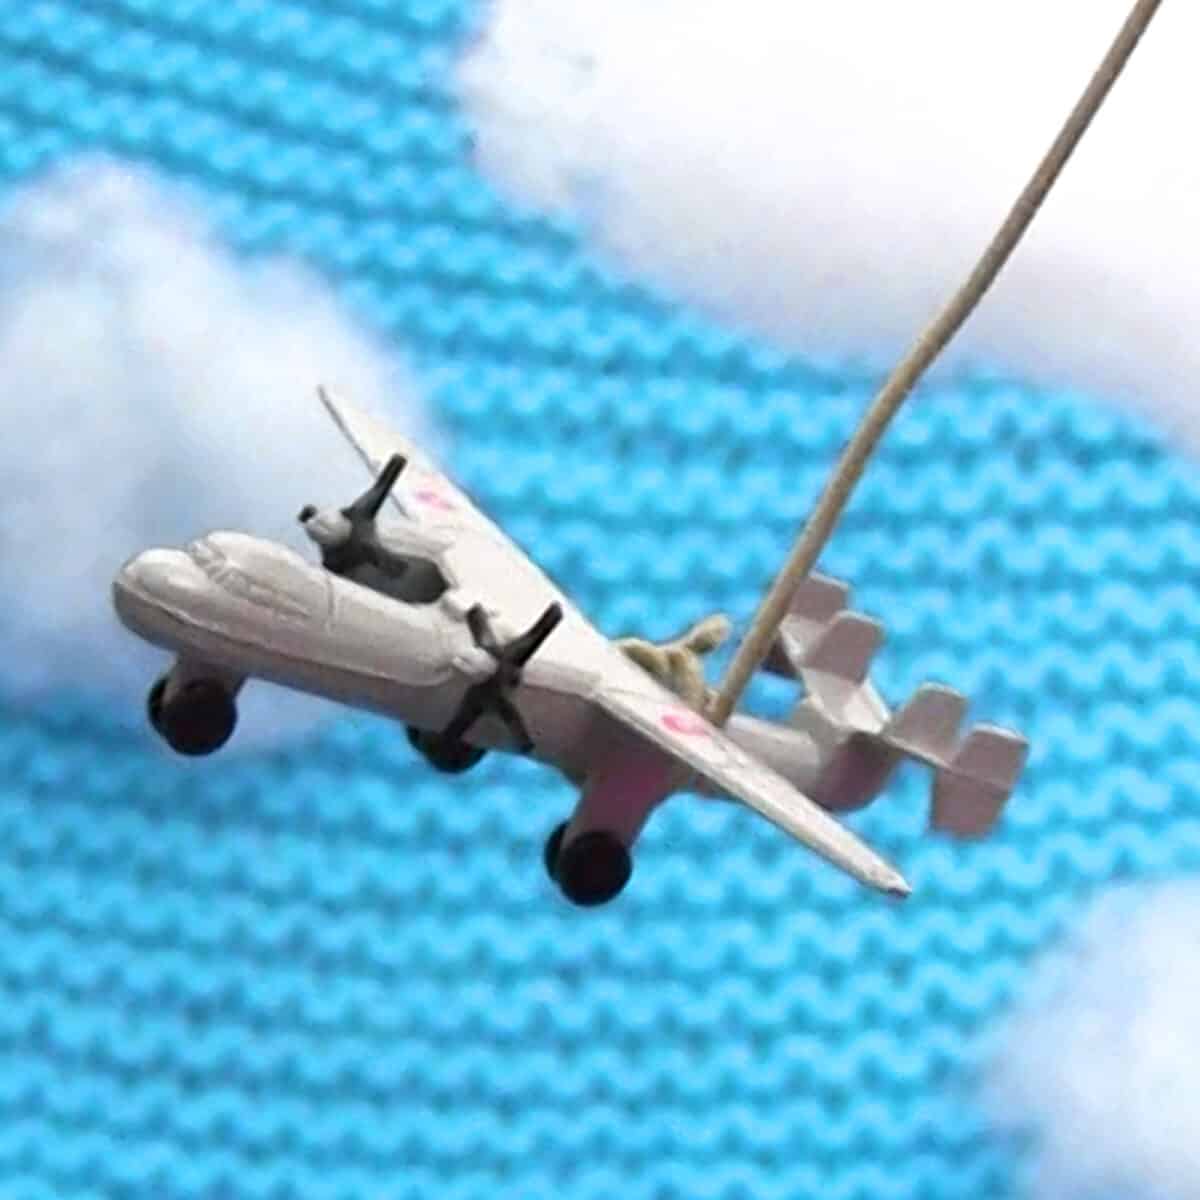 Toy airplane over swatch of knitted garter stitch blanket in blue yarn color with poly-fill clouds.